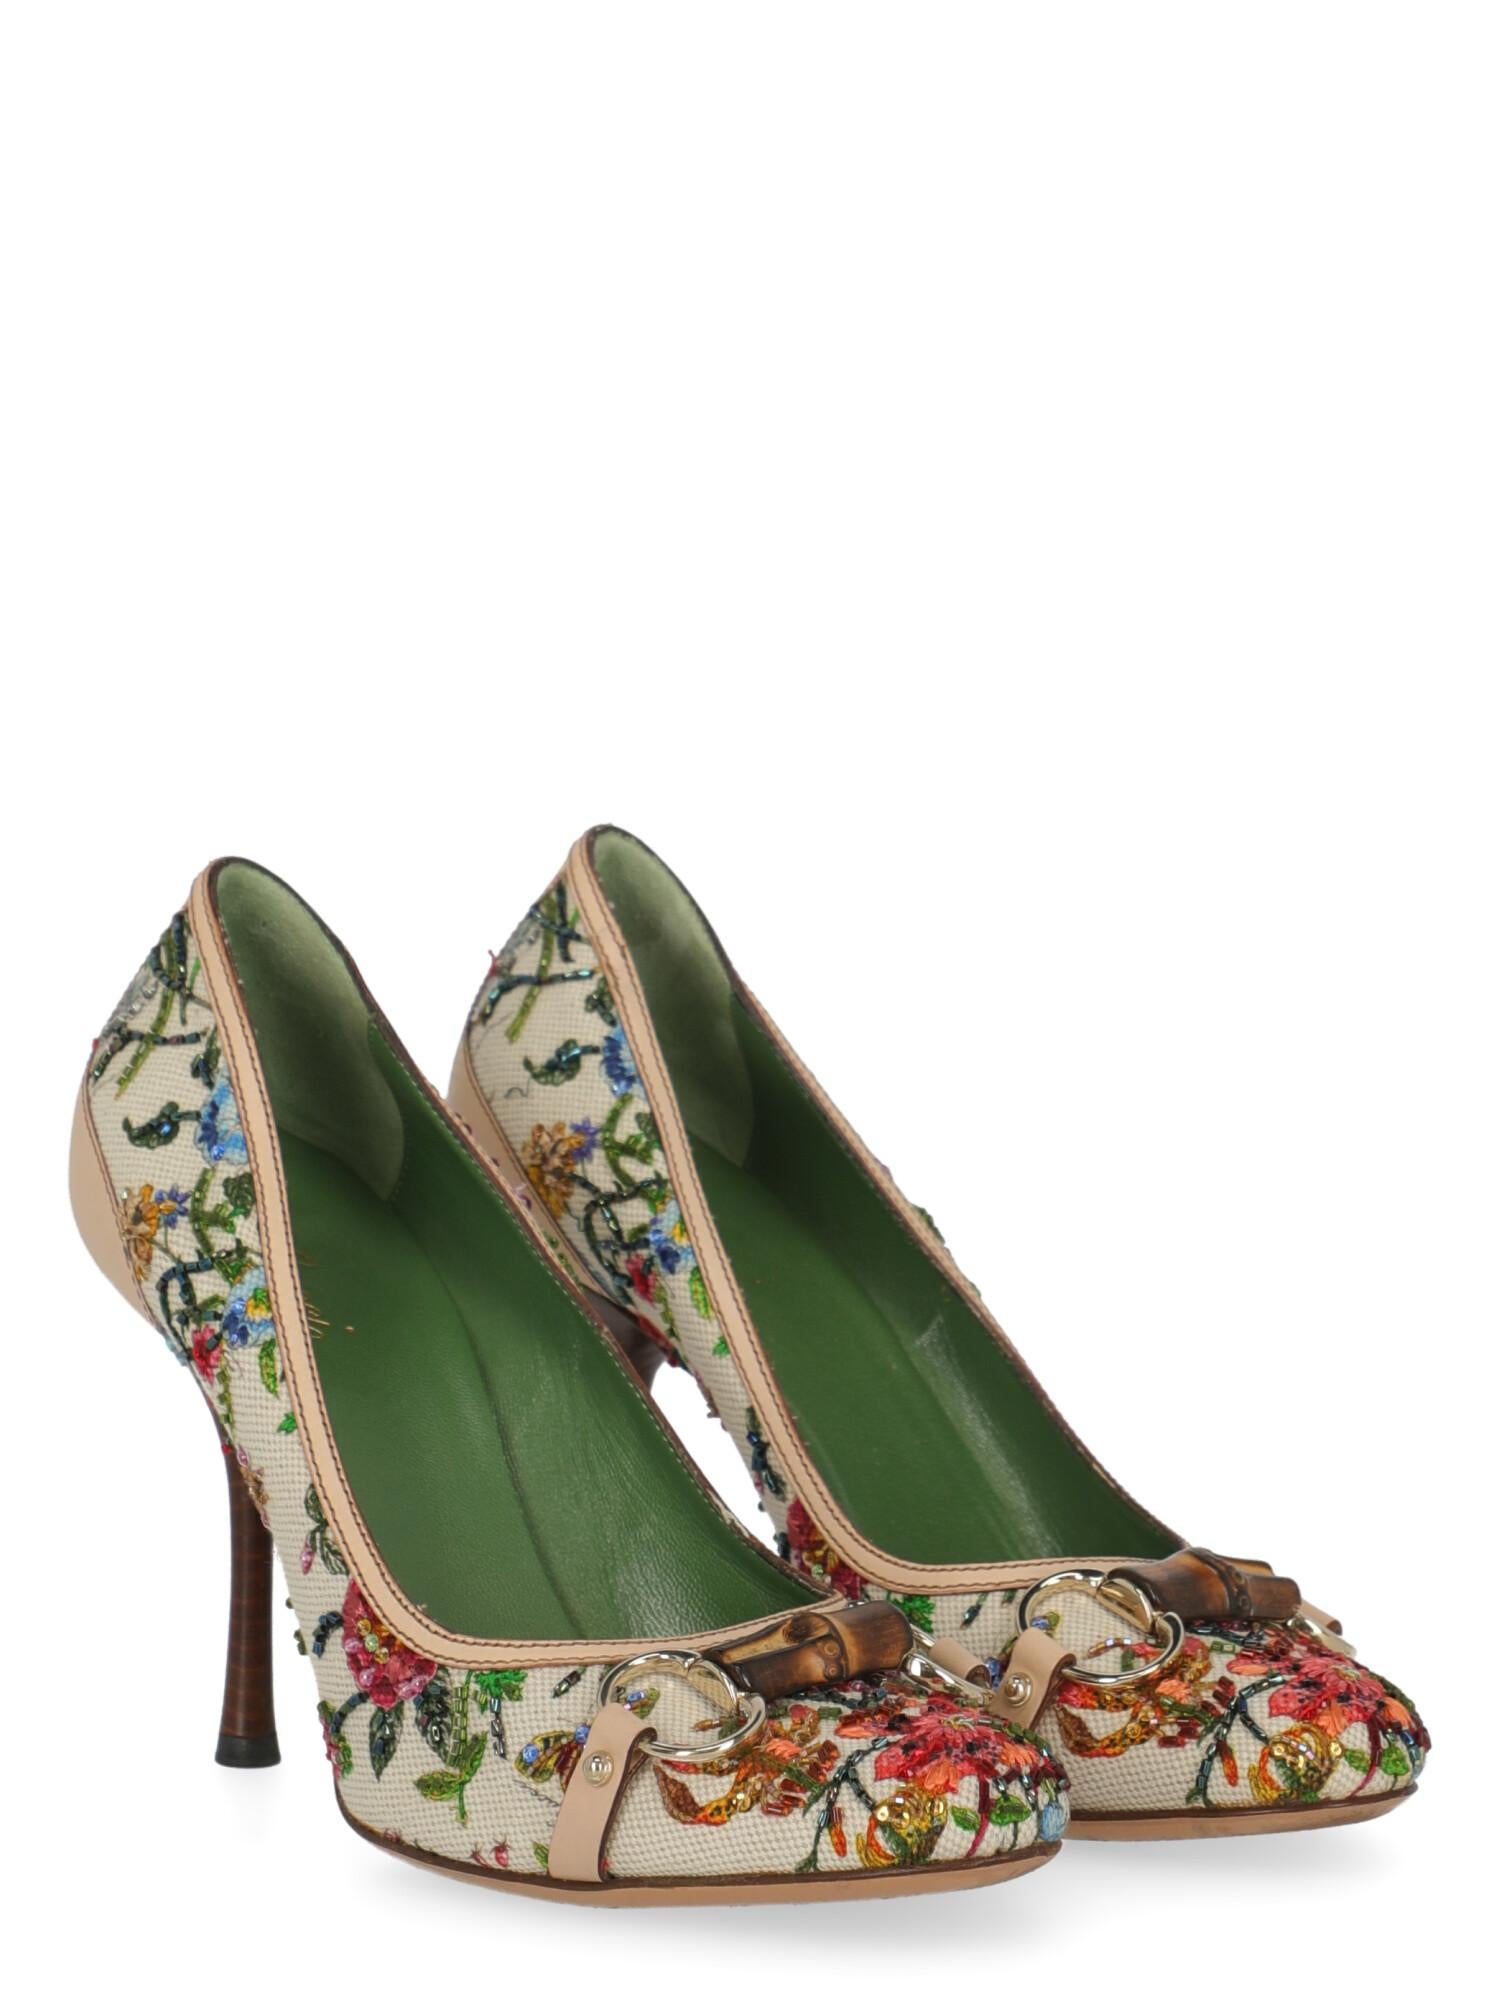 Pumps, fabric, floral print, iconic detail, ligth gold-tone hardware, round toe, branded insole, tapered heel, high heel

Includes:
-  Box
- Dust bag

Product Condition: Very Good
Heel: slightly visible marks. Sole: visible signs of use. Upper: